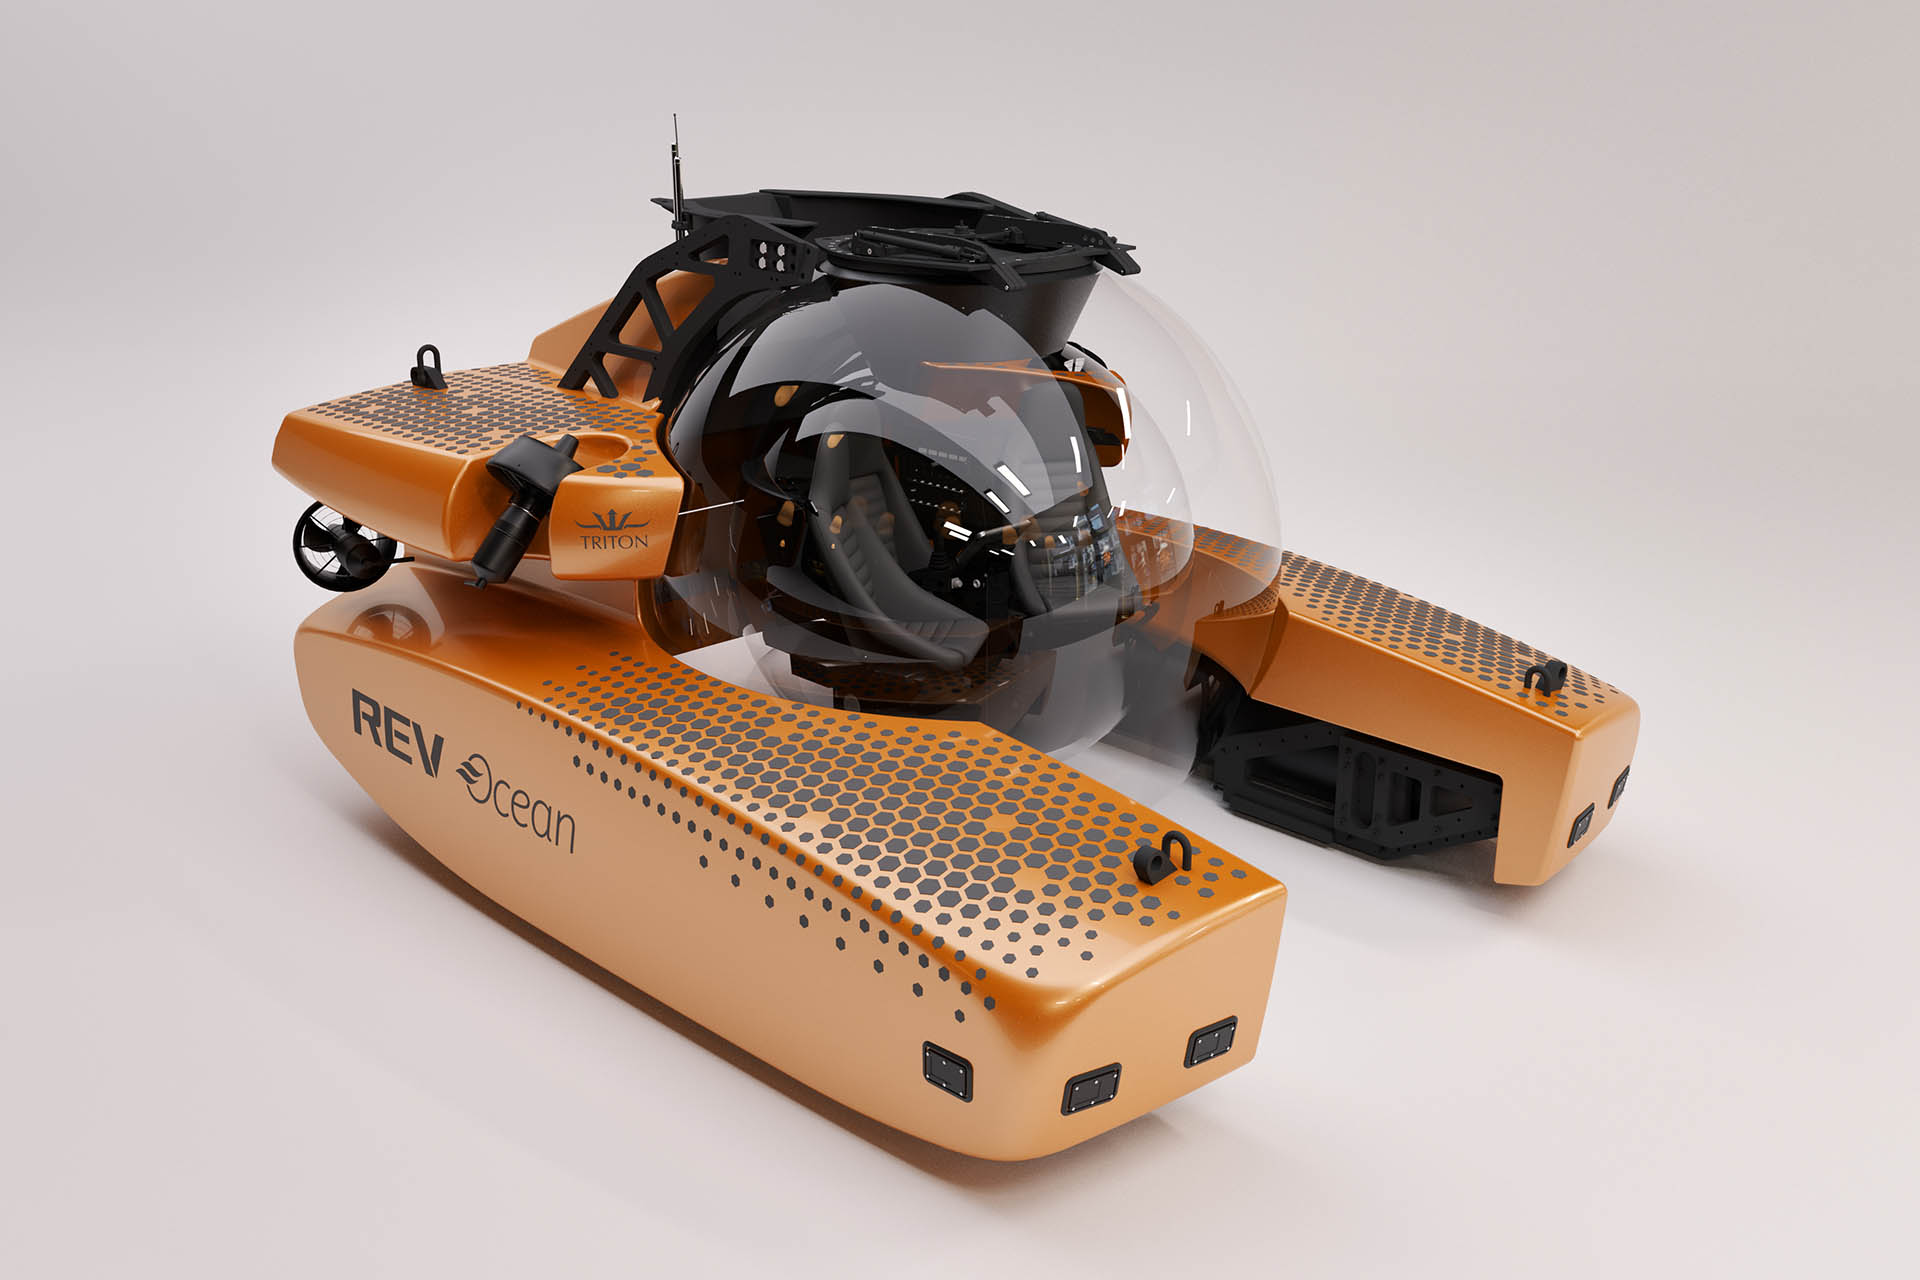 World’s deepest diving three-person acrylic submersible is ready for